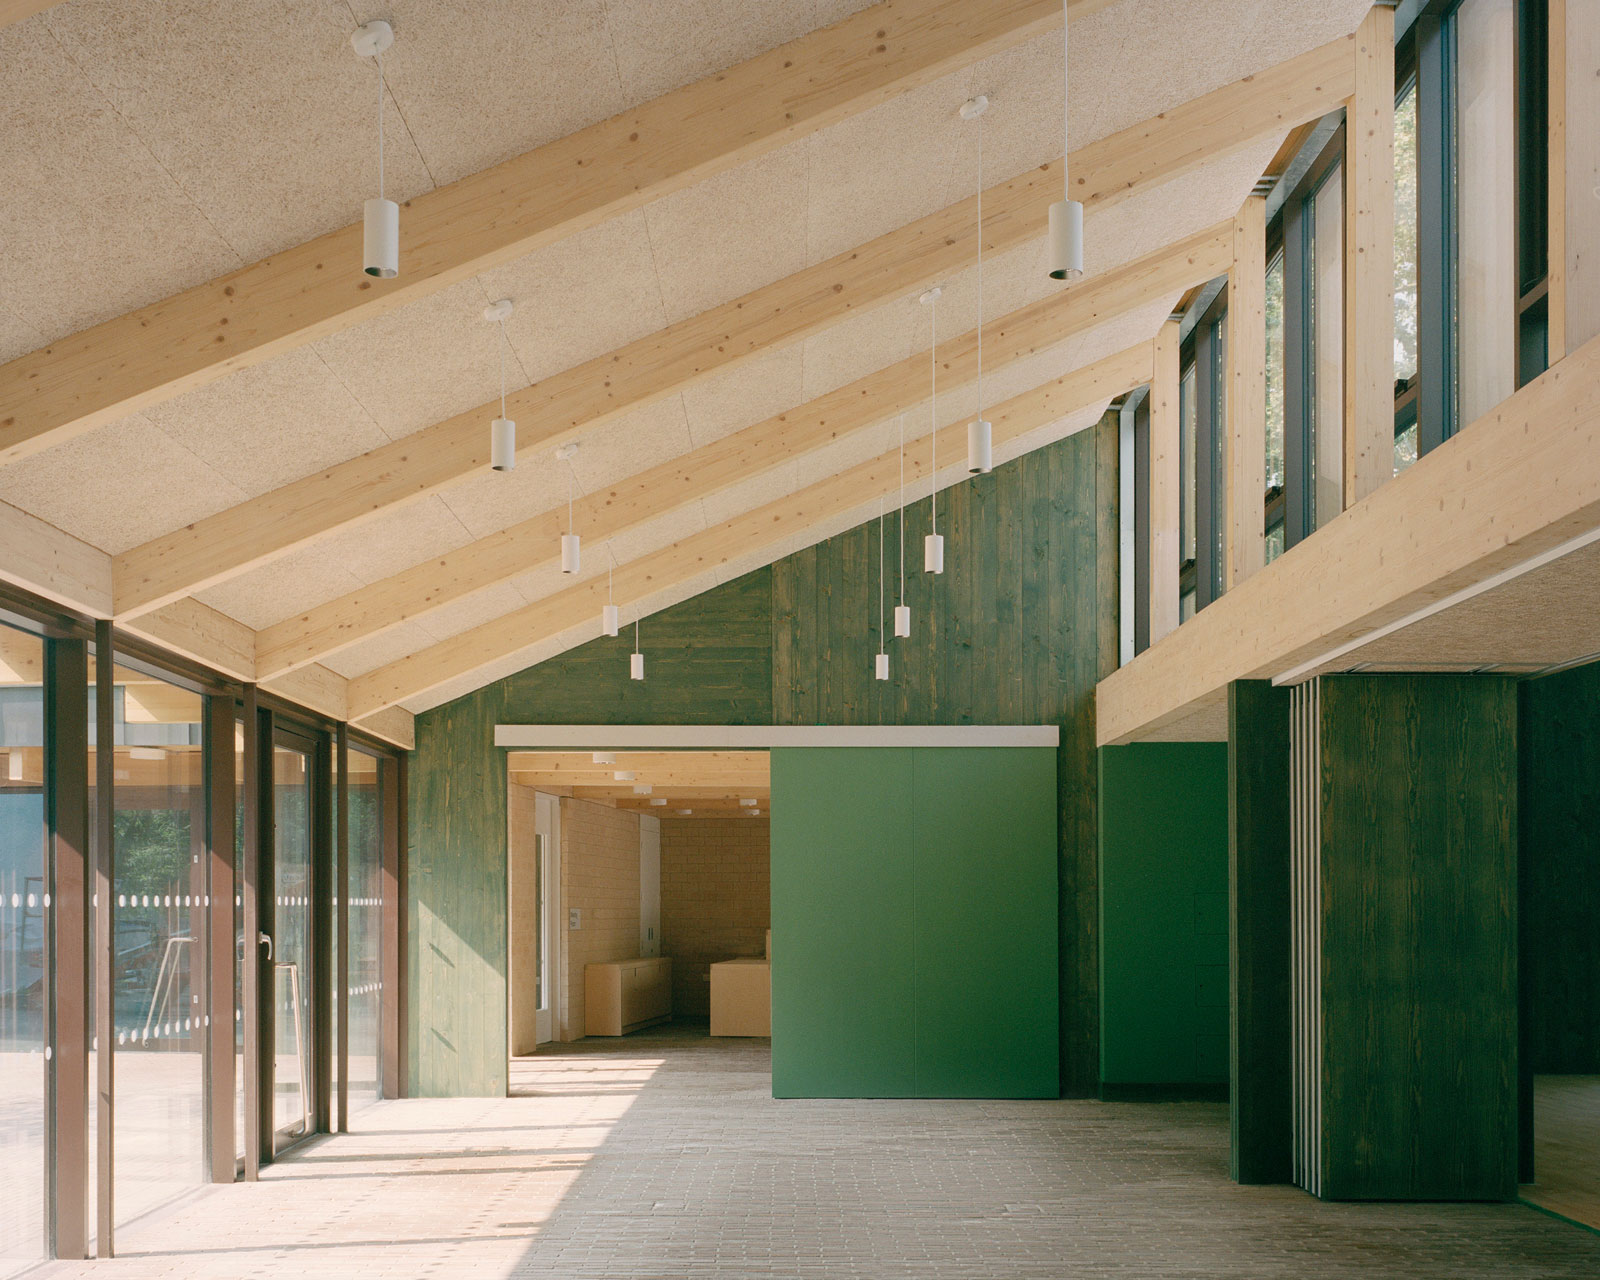 Image of 20220927 MaeArchitects SandsEnd 5 in Sands End Arts & Community Centre - Cosentino